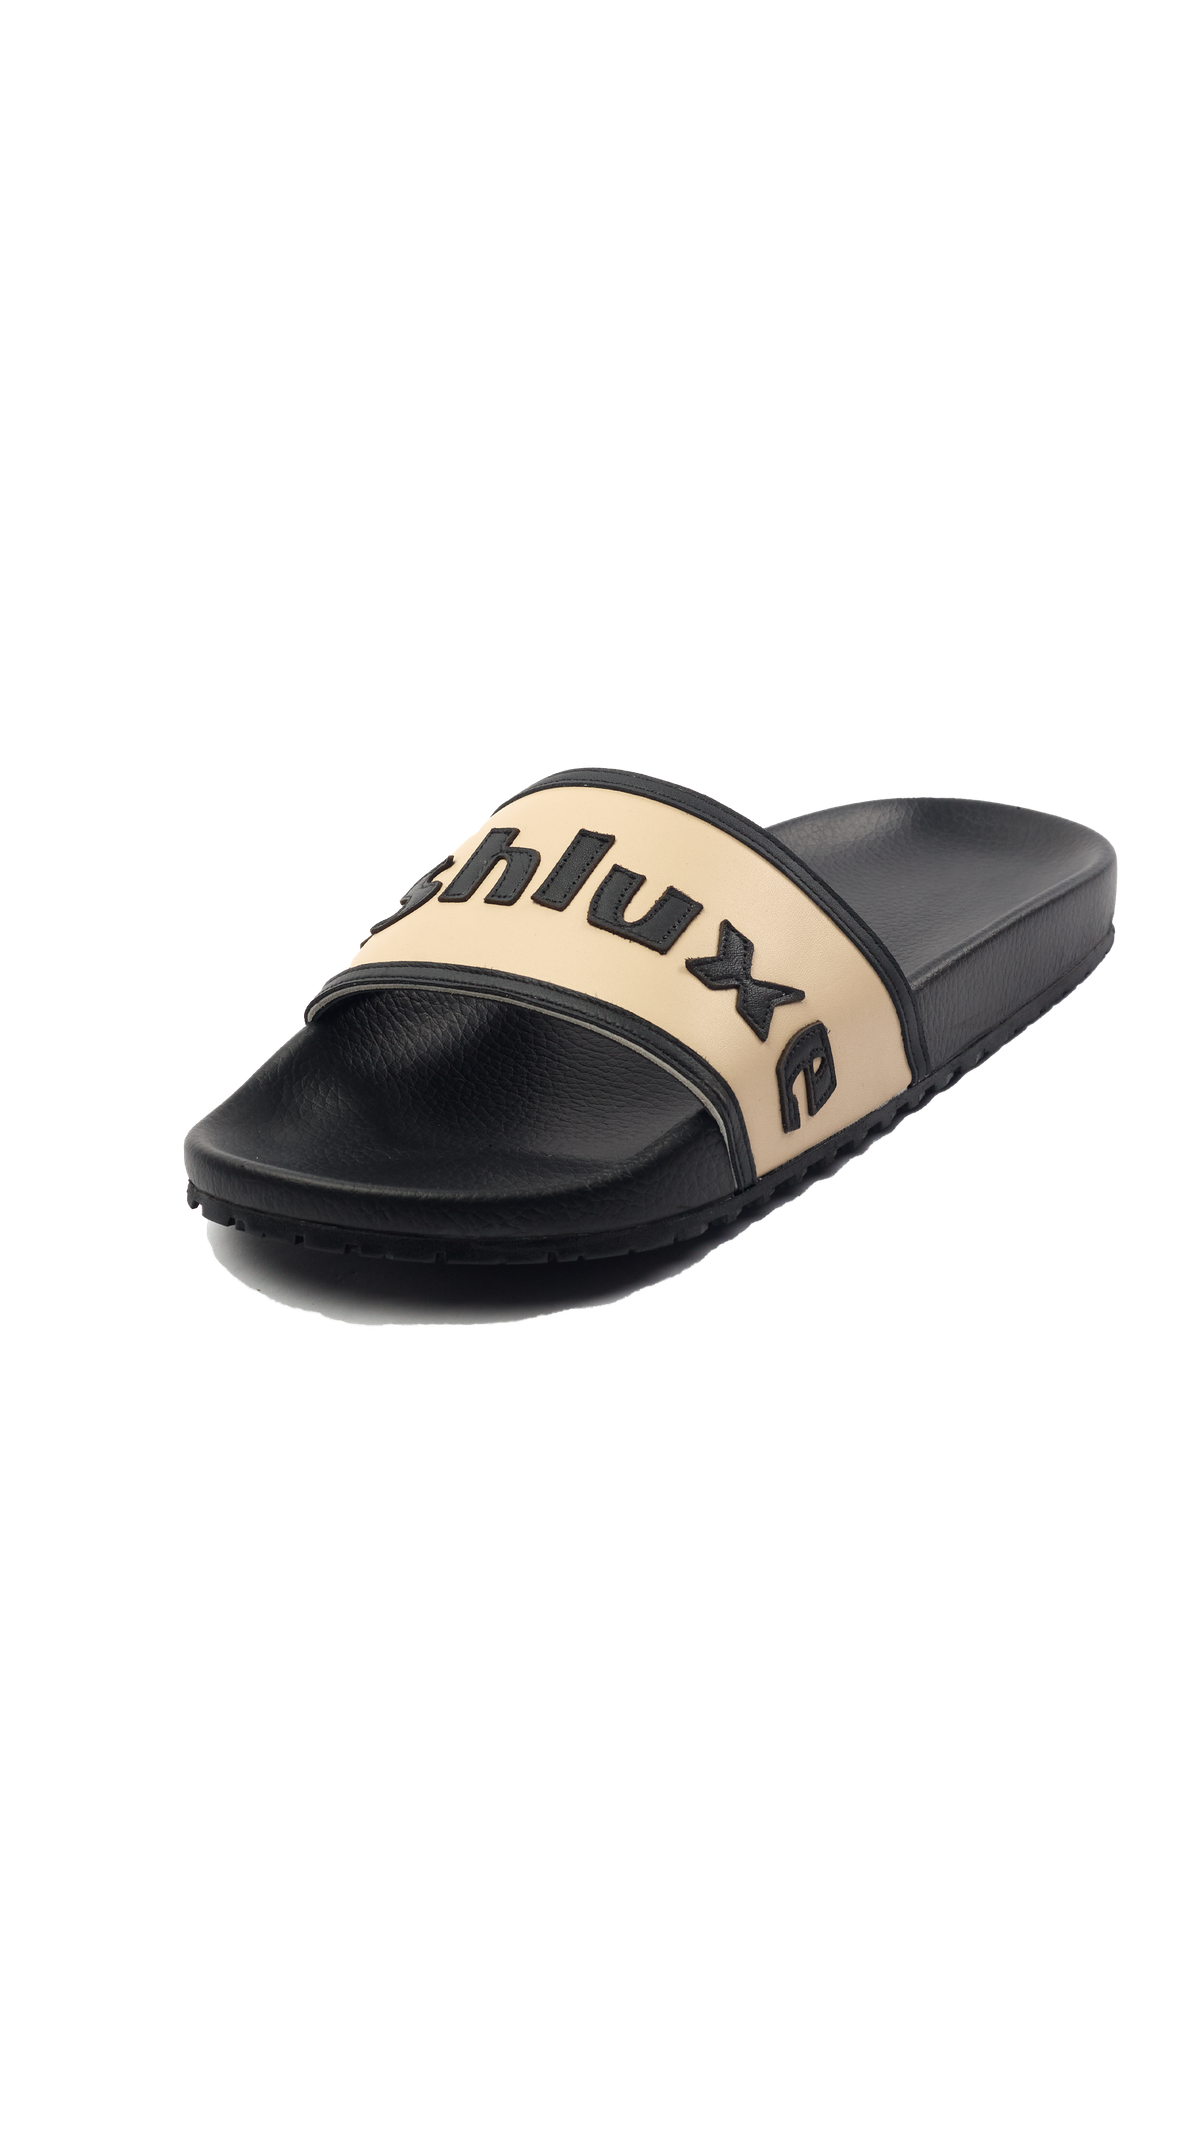 Ashluxe Stitched Leather Slides - Apricot